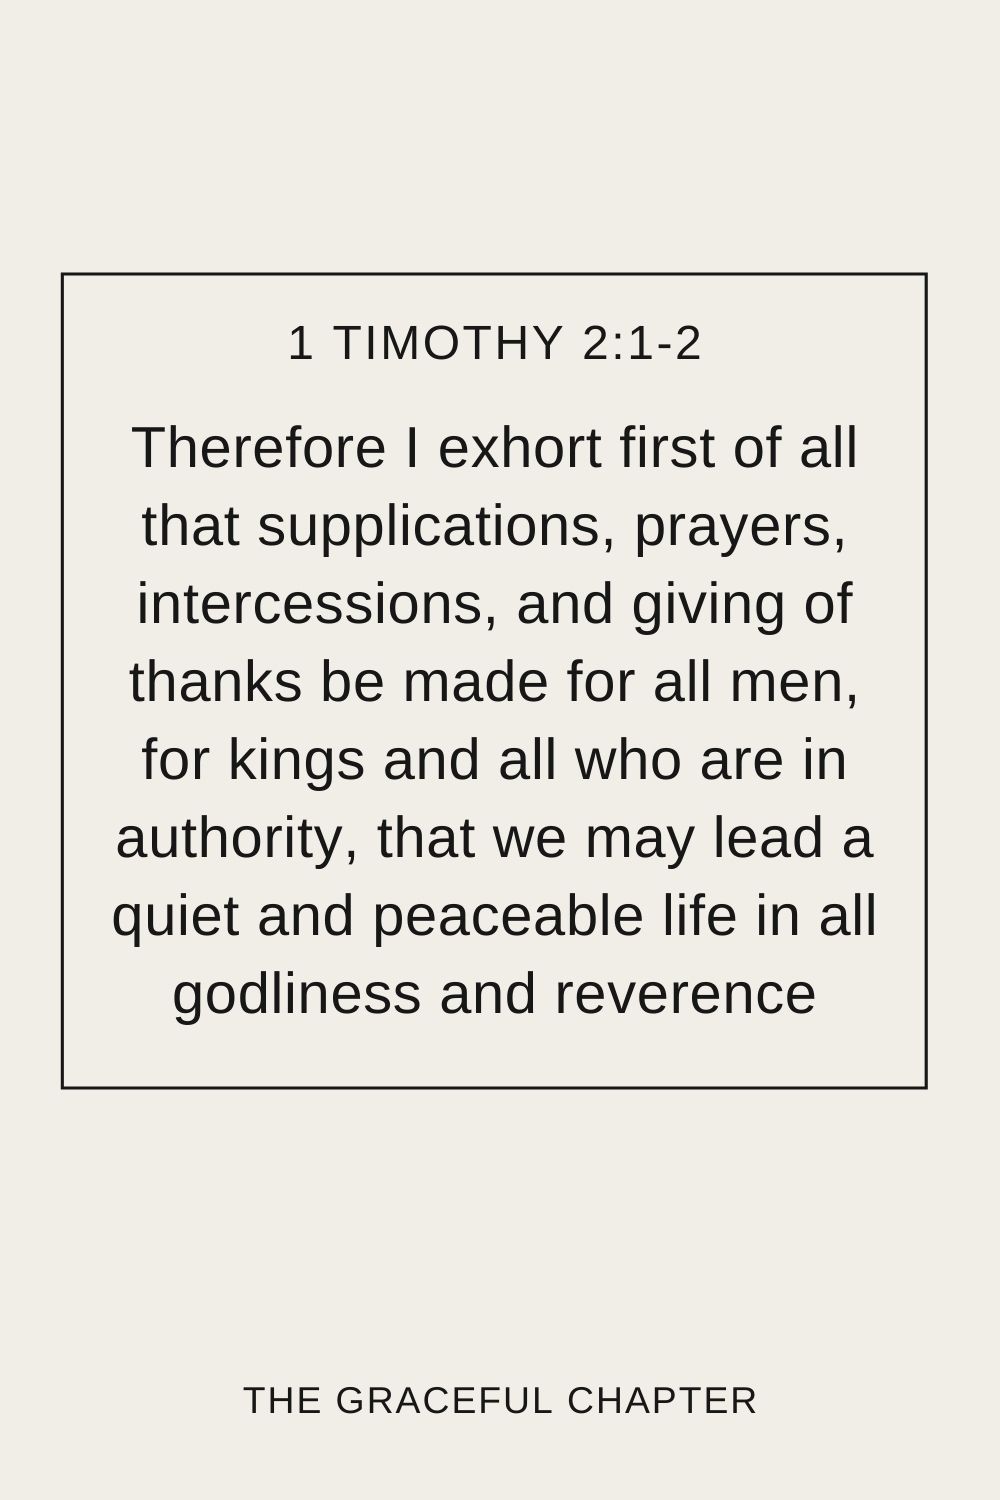 Therefore I exhort first of all that supplications, prayers, intercessions, and giving of thanks be made for all men, for kings and all who are in authority, that we may lead a quiet and peaceable life in all godliness and reverence. 1 Timothy 2:1-2